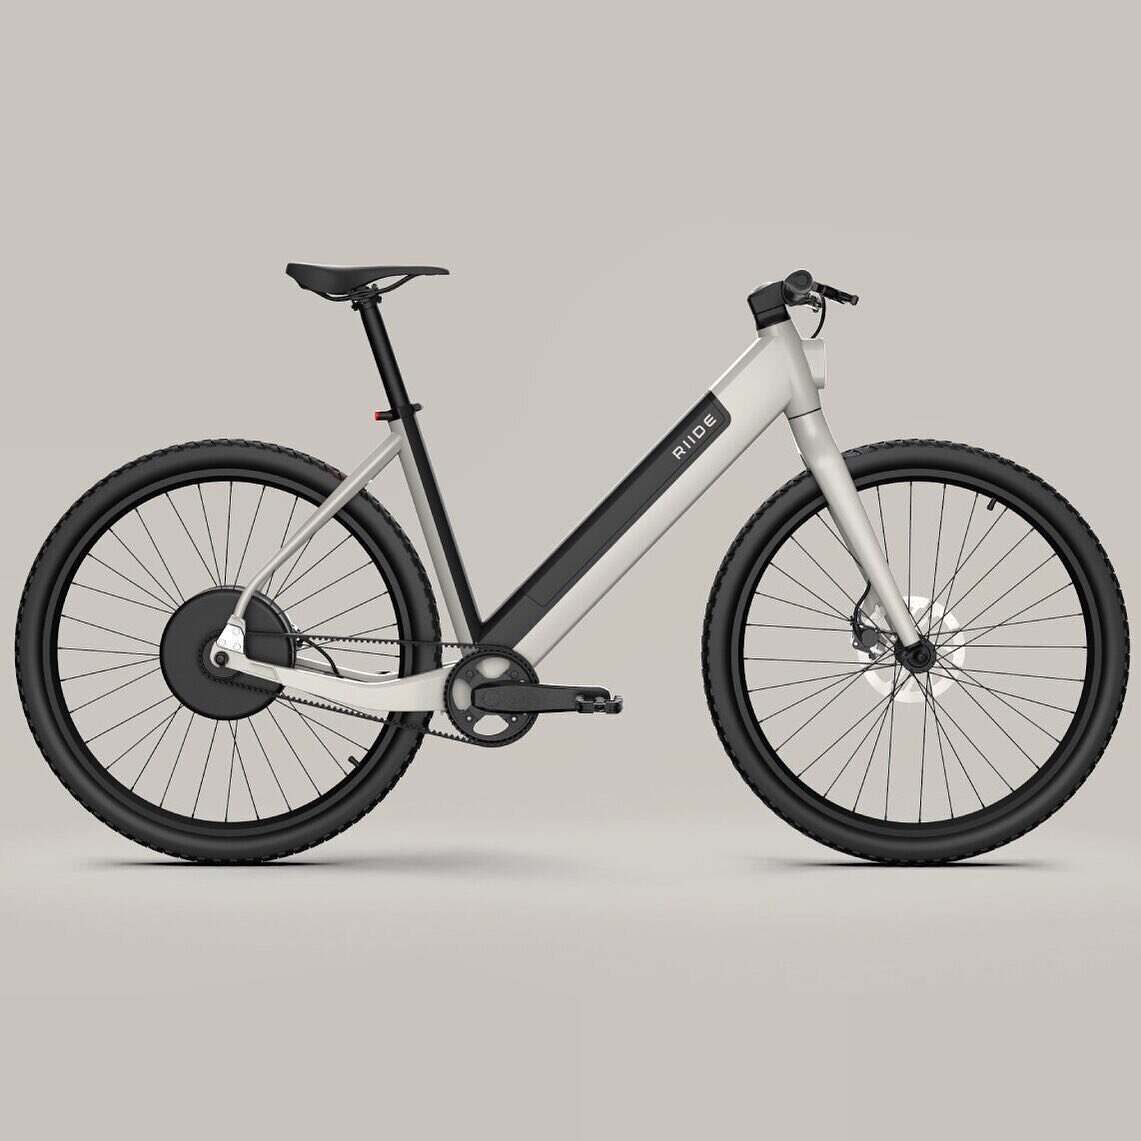 After several iterations and years of testing the new V2 RIIDE has been released! Designed by LKS in collaboration with the great team at RIIDE. Check it out at www.riide.com #electricbike #ebike #ebikes #bicycling #commutebybike #design #productdesi